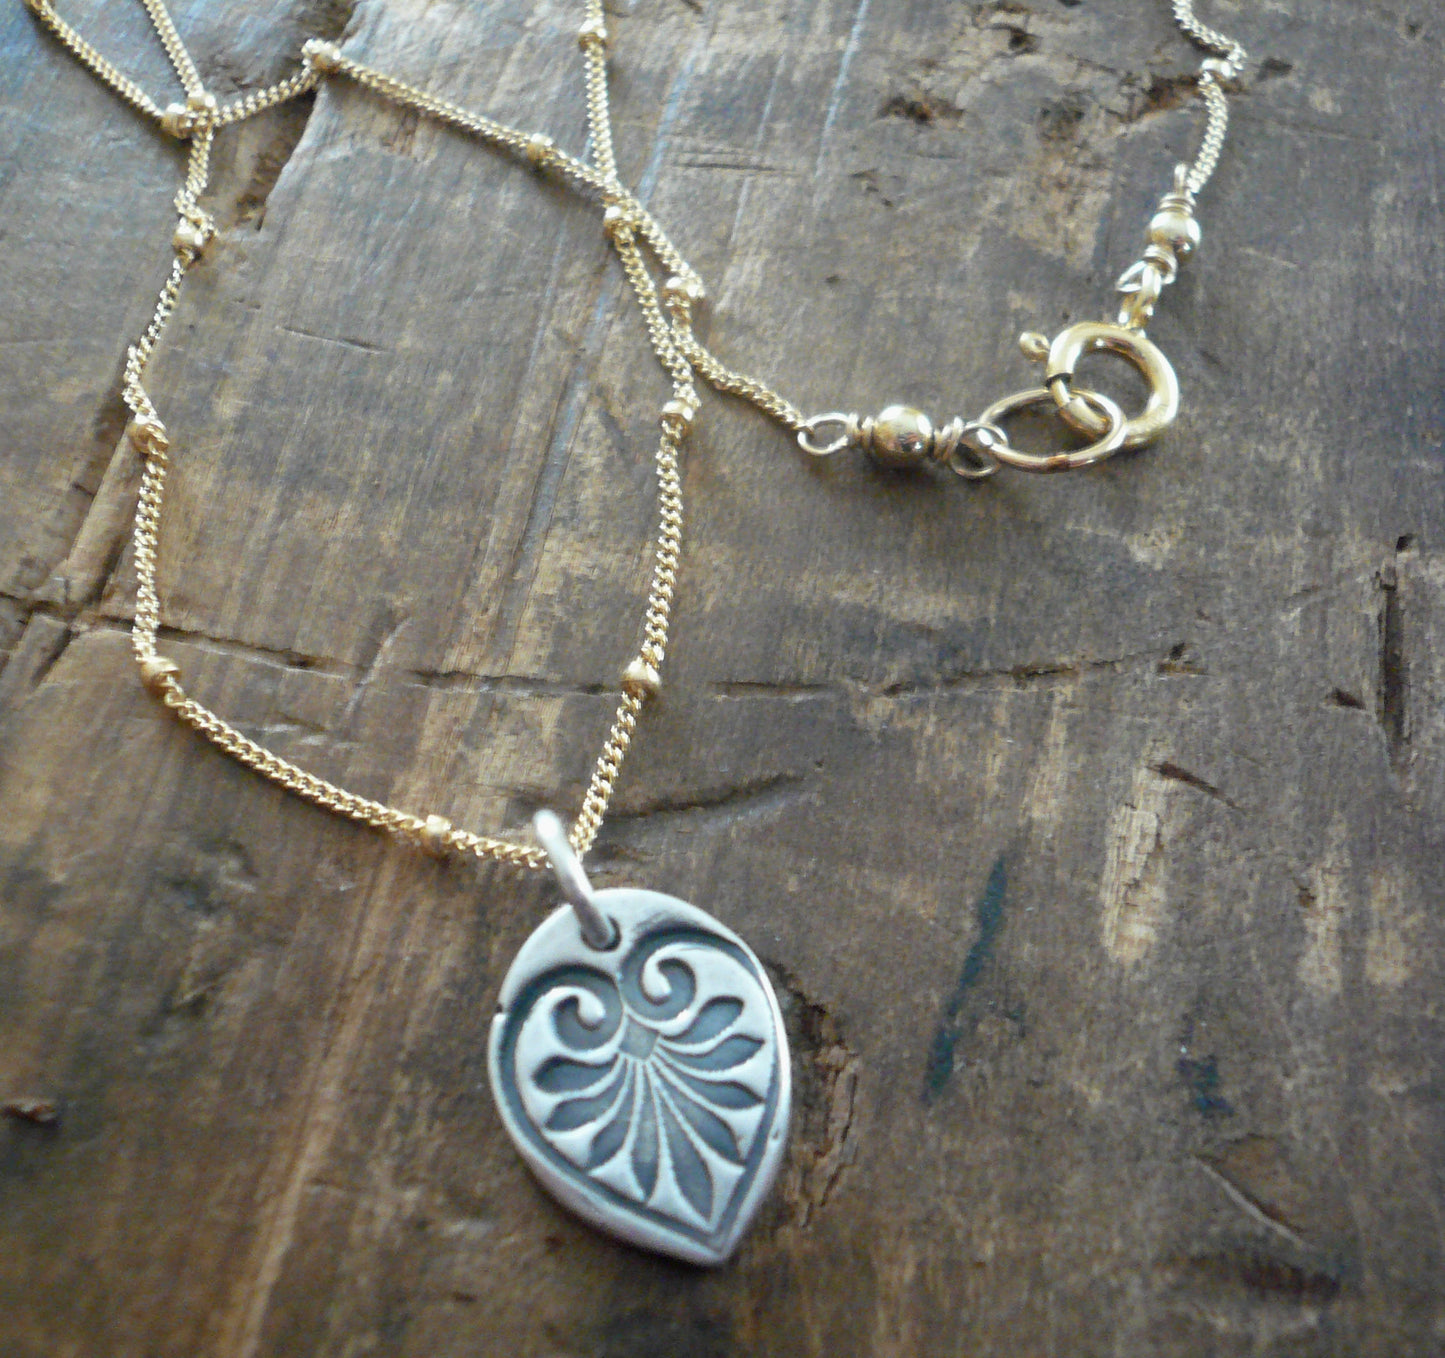 French Quarter Necklace -Leaf - Oxidized fine silver and 14kt Goldfill or sterling silver chain. Handmade